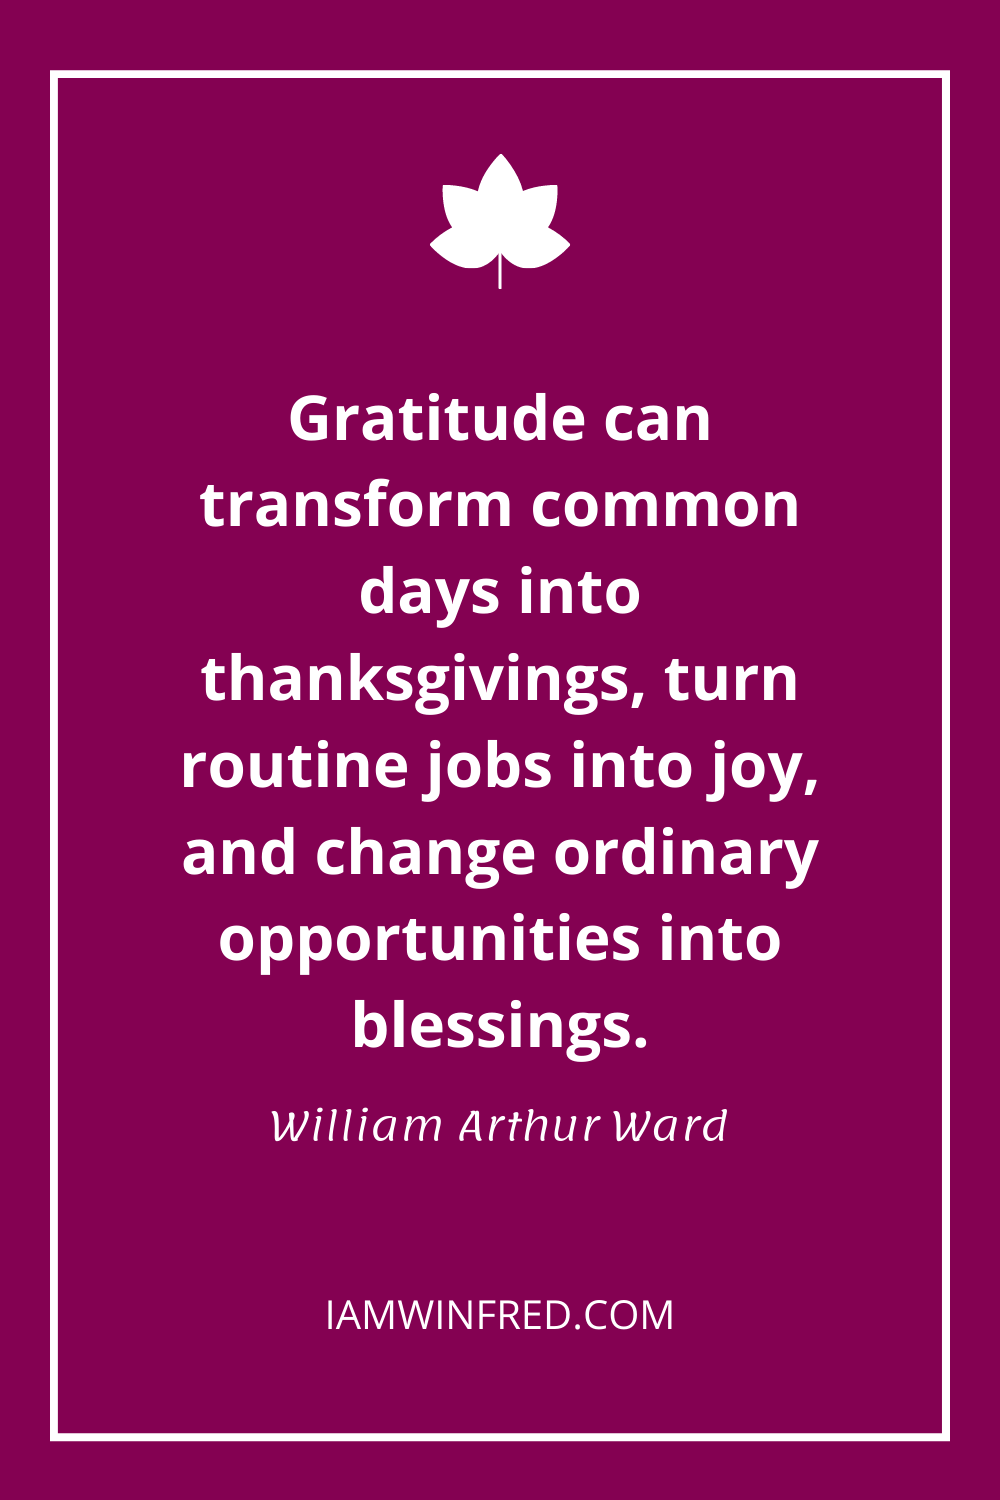 Gratitude Can Transform Common Days Into Thanksgivings Turn Routine Jobs Into Joy And Change Ordinary Opportunities Into Blessings.